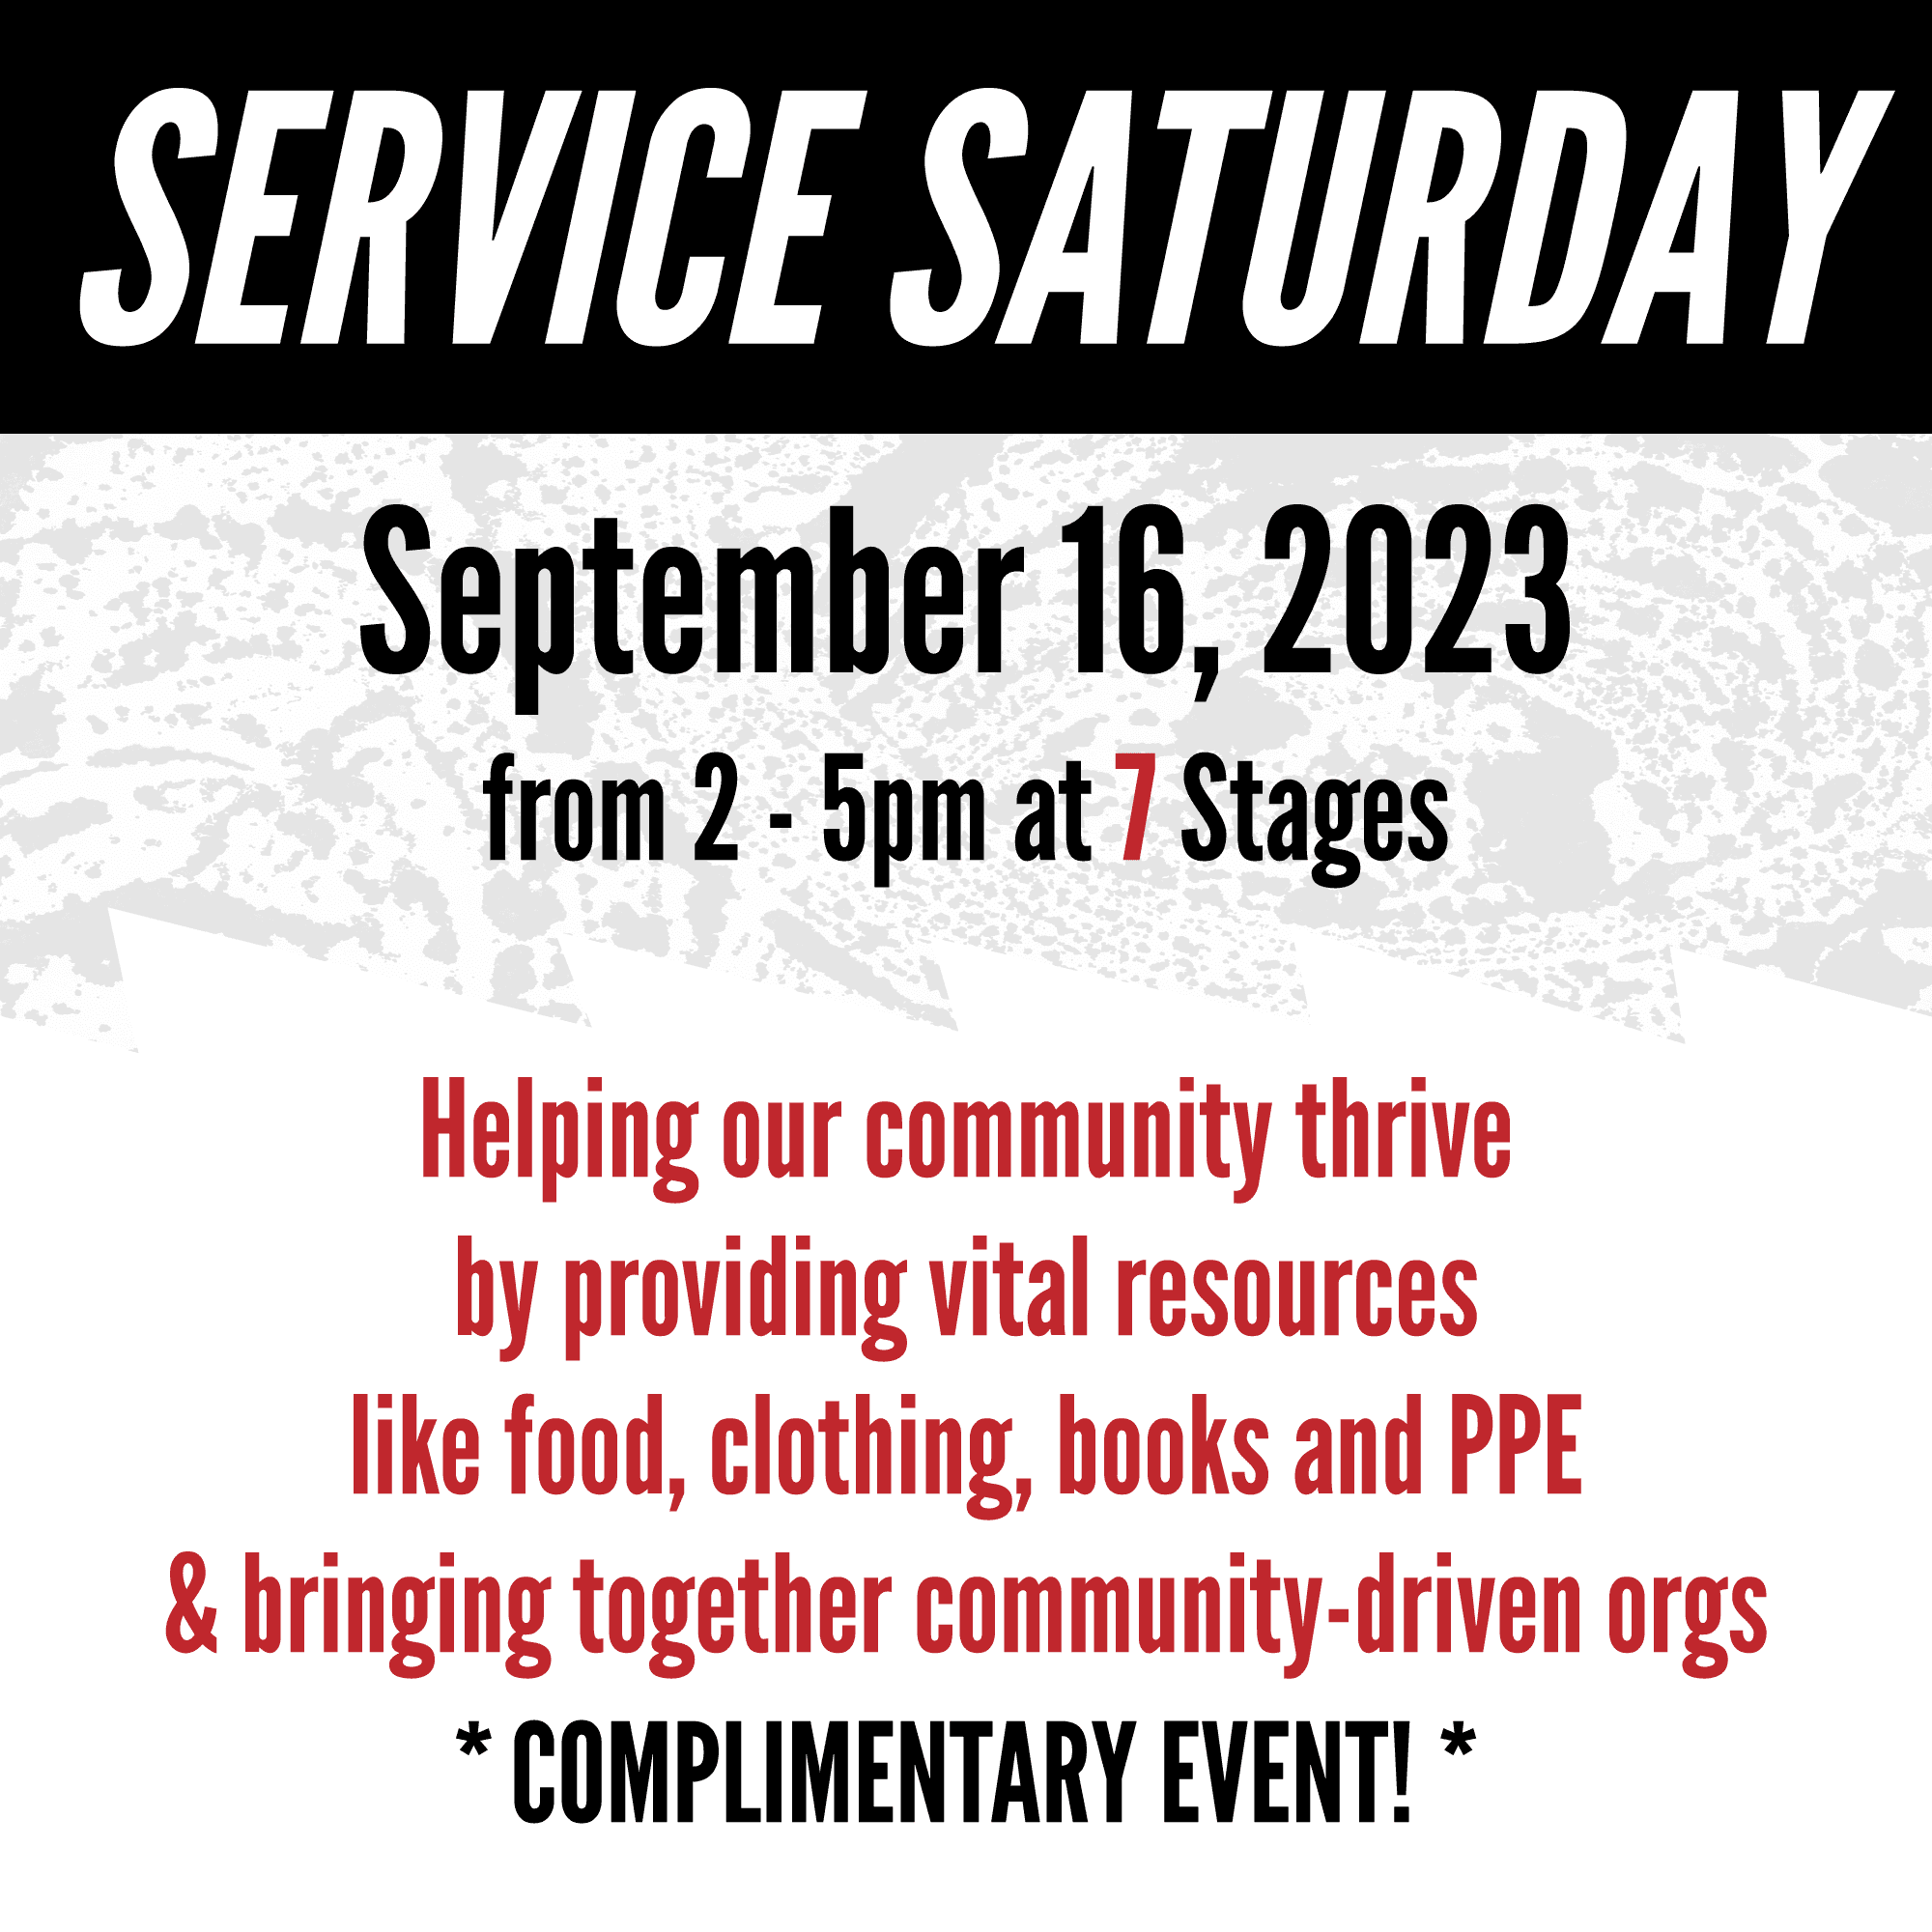 Service Saturday September 16, 2023 from 2-5 P.M. at 7 Stages. Helping our community thrive by providing vital resources like food, clothing, books, and P.P.E. and bringing together community driven organizations. Complimentary event!